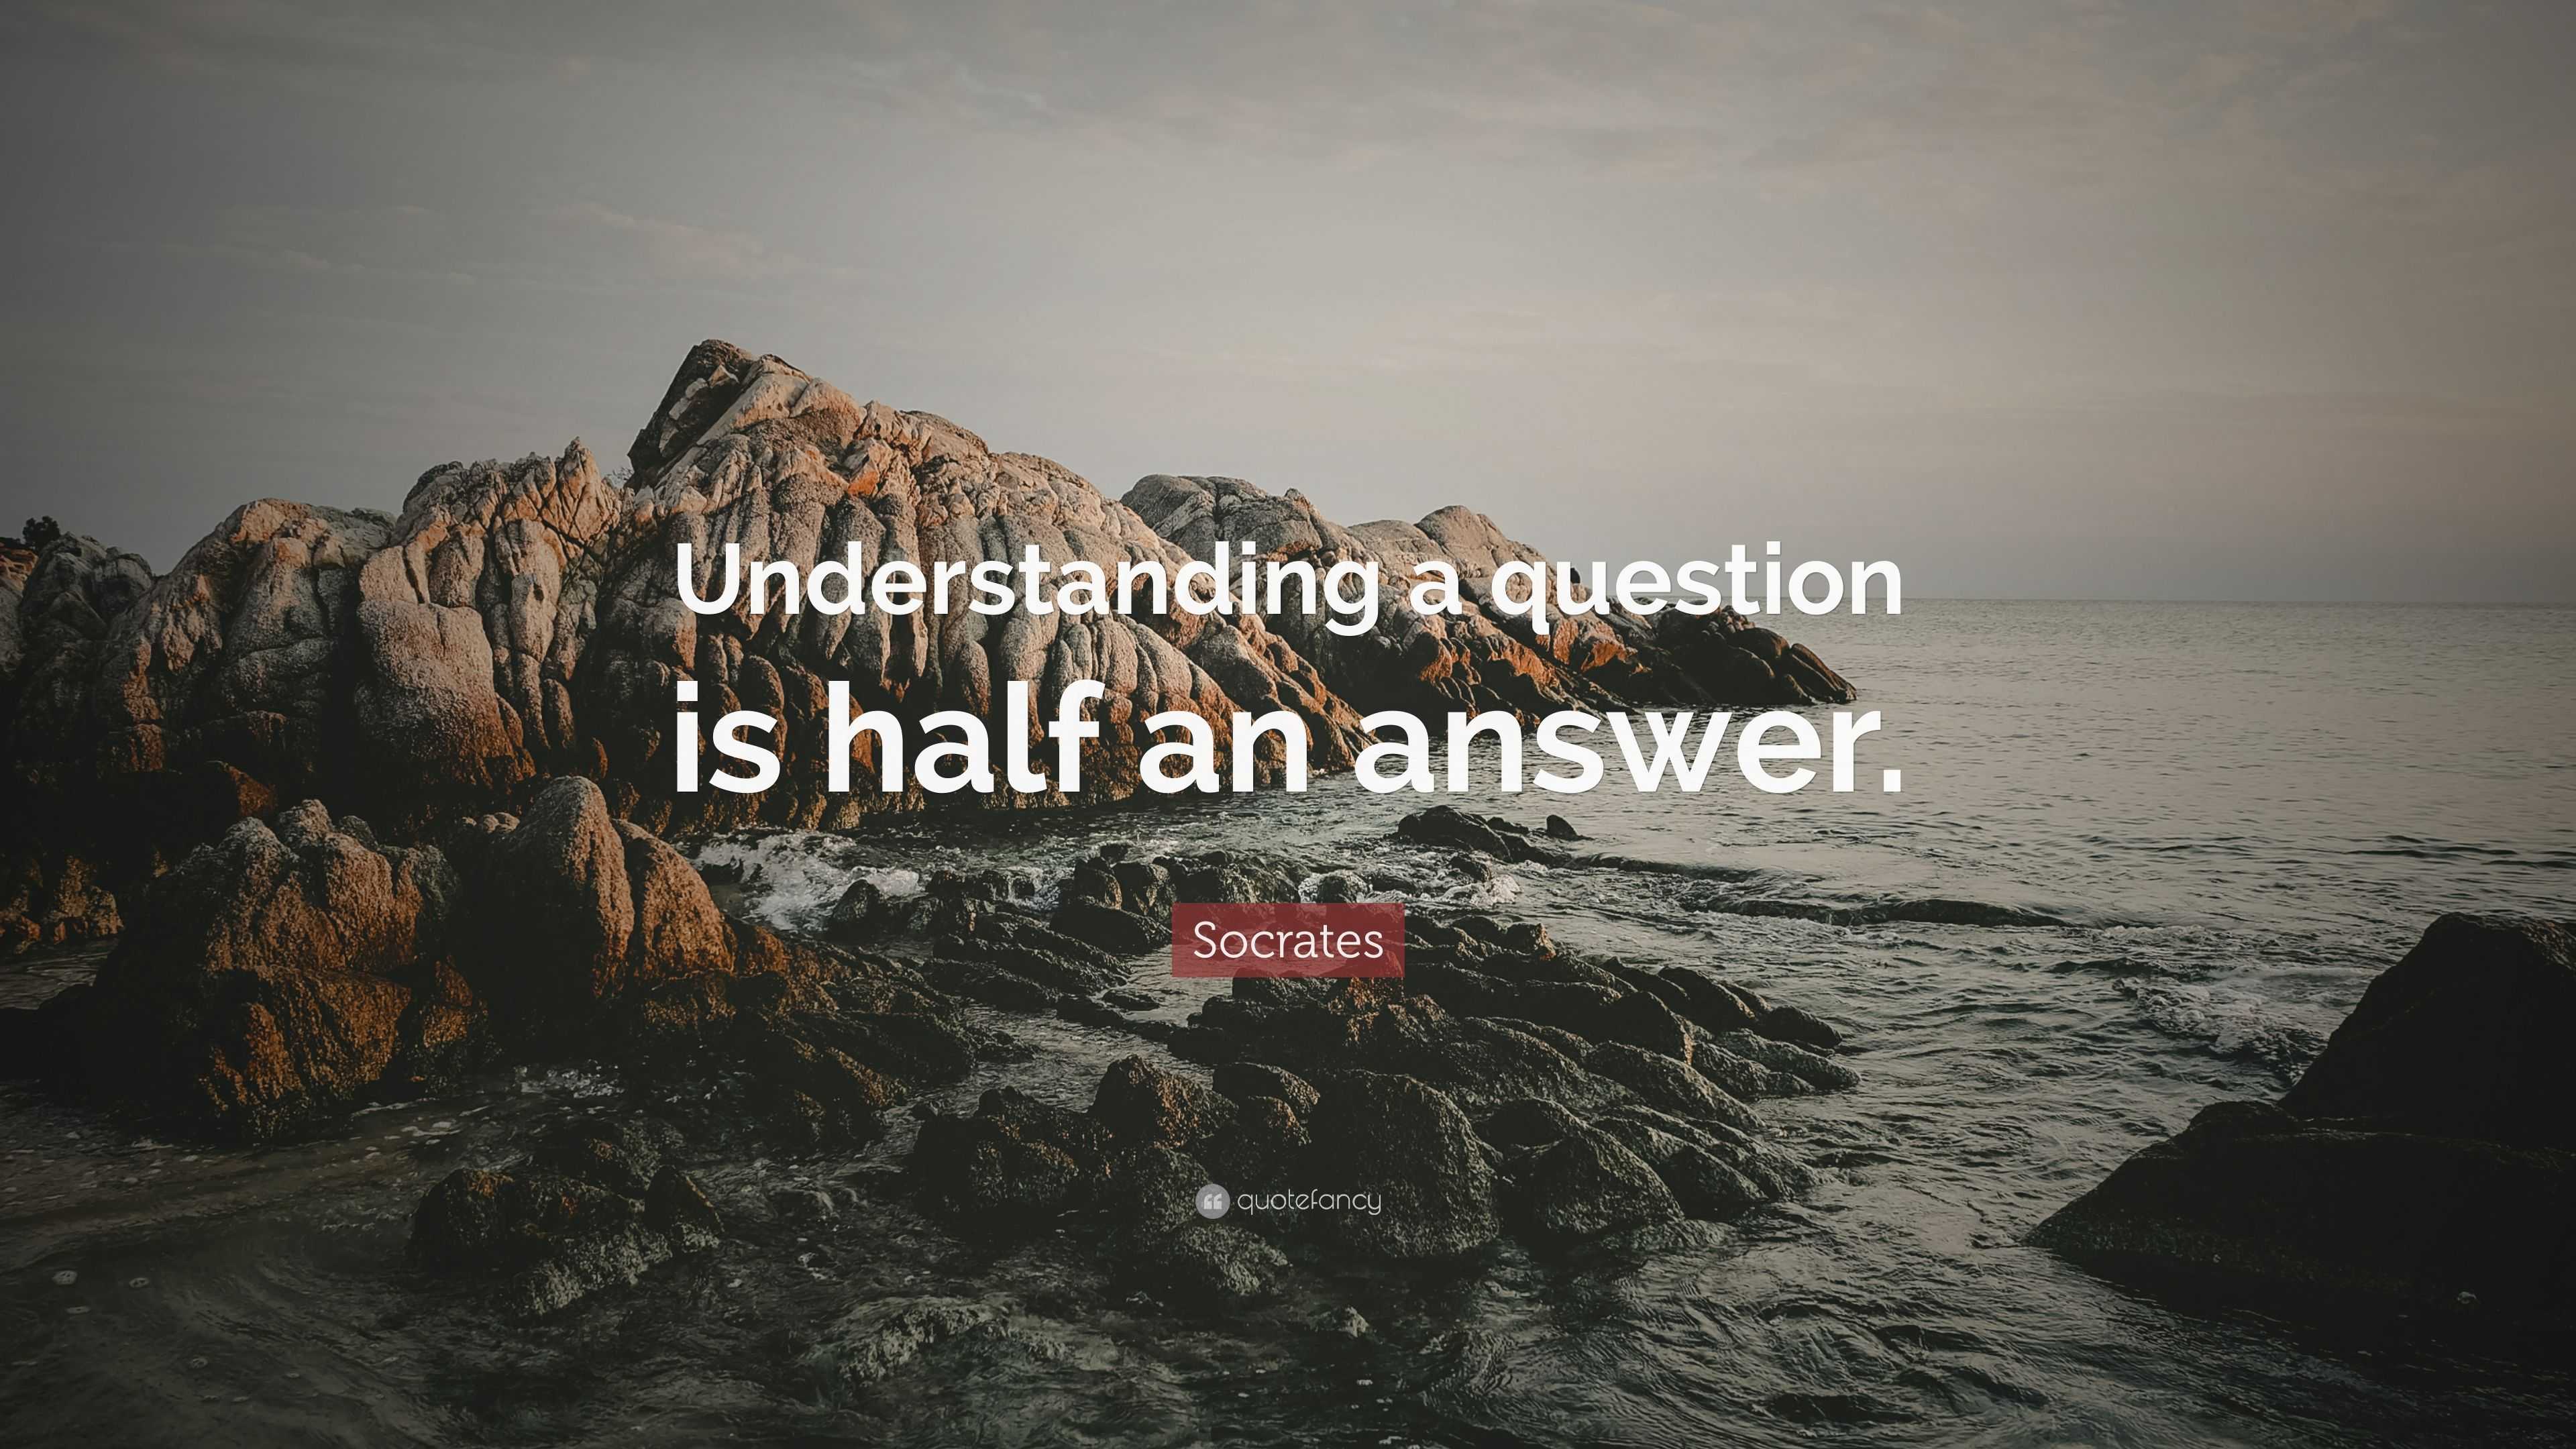 Socrates Quote: “Understanding a question is half an answer.”